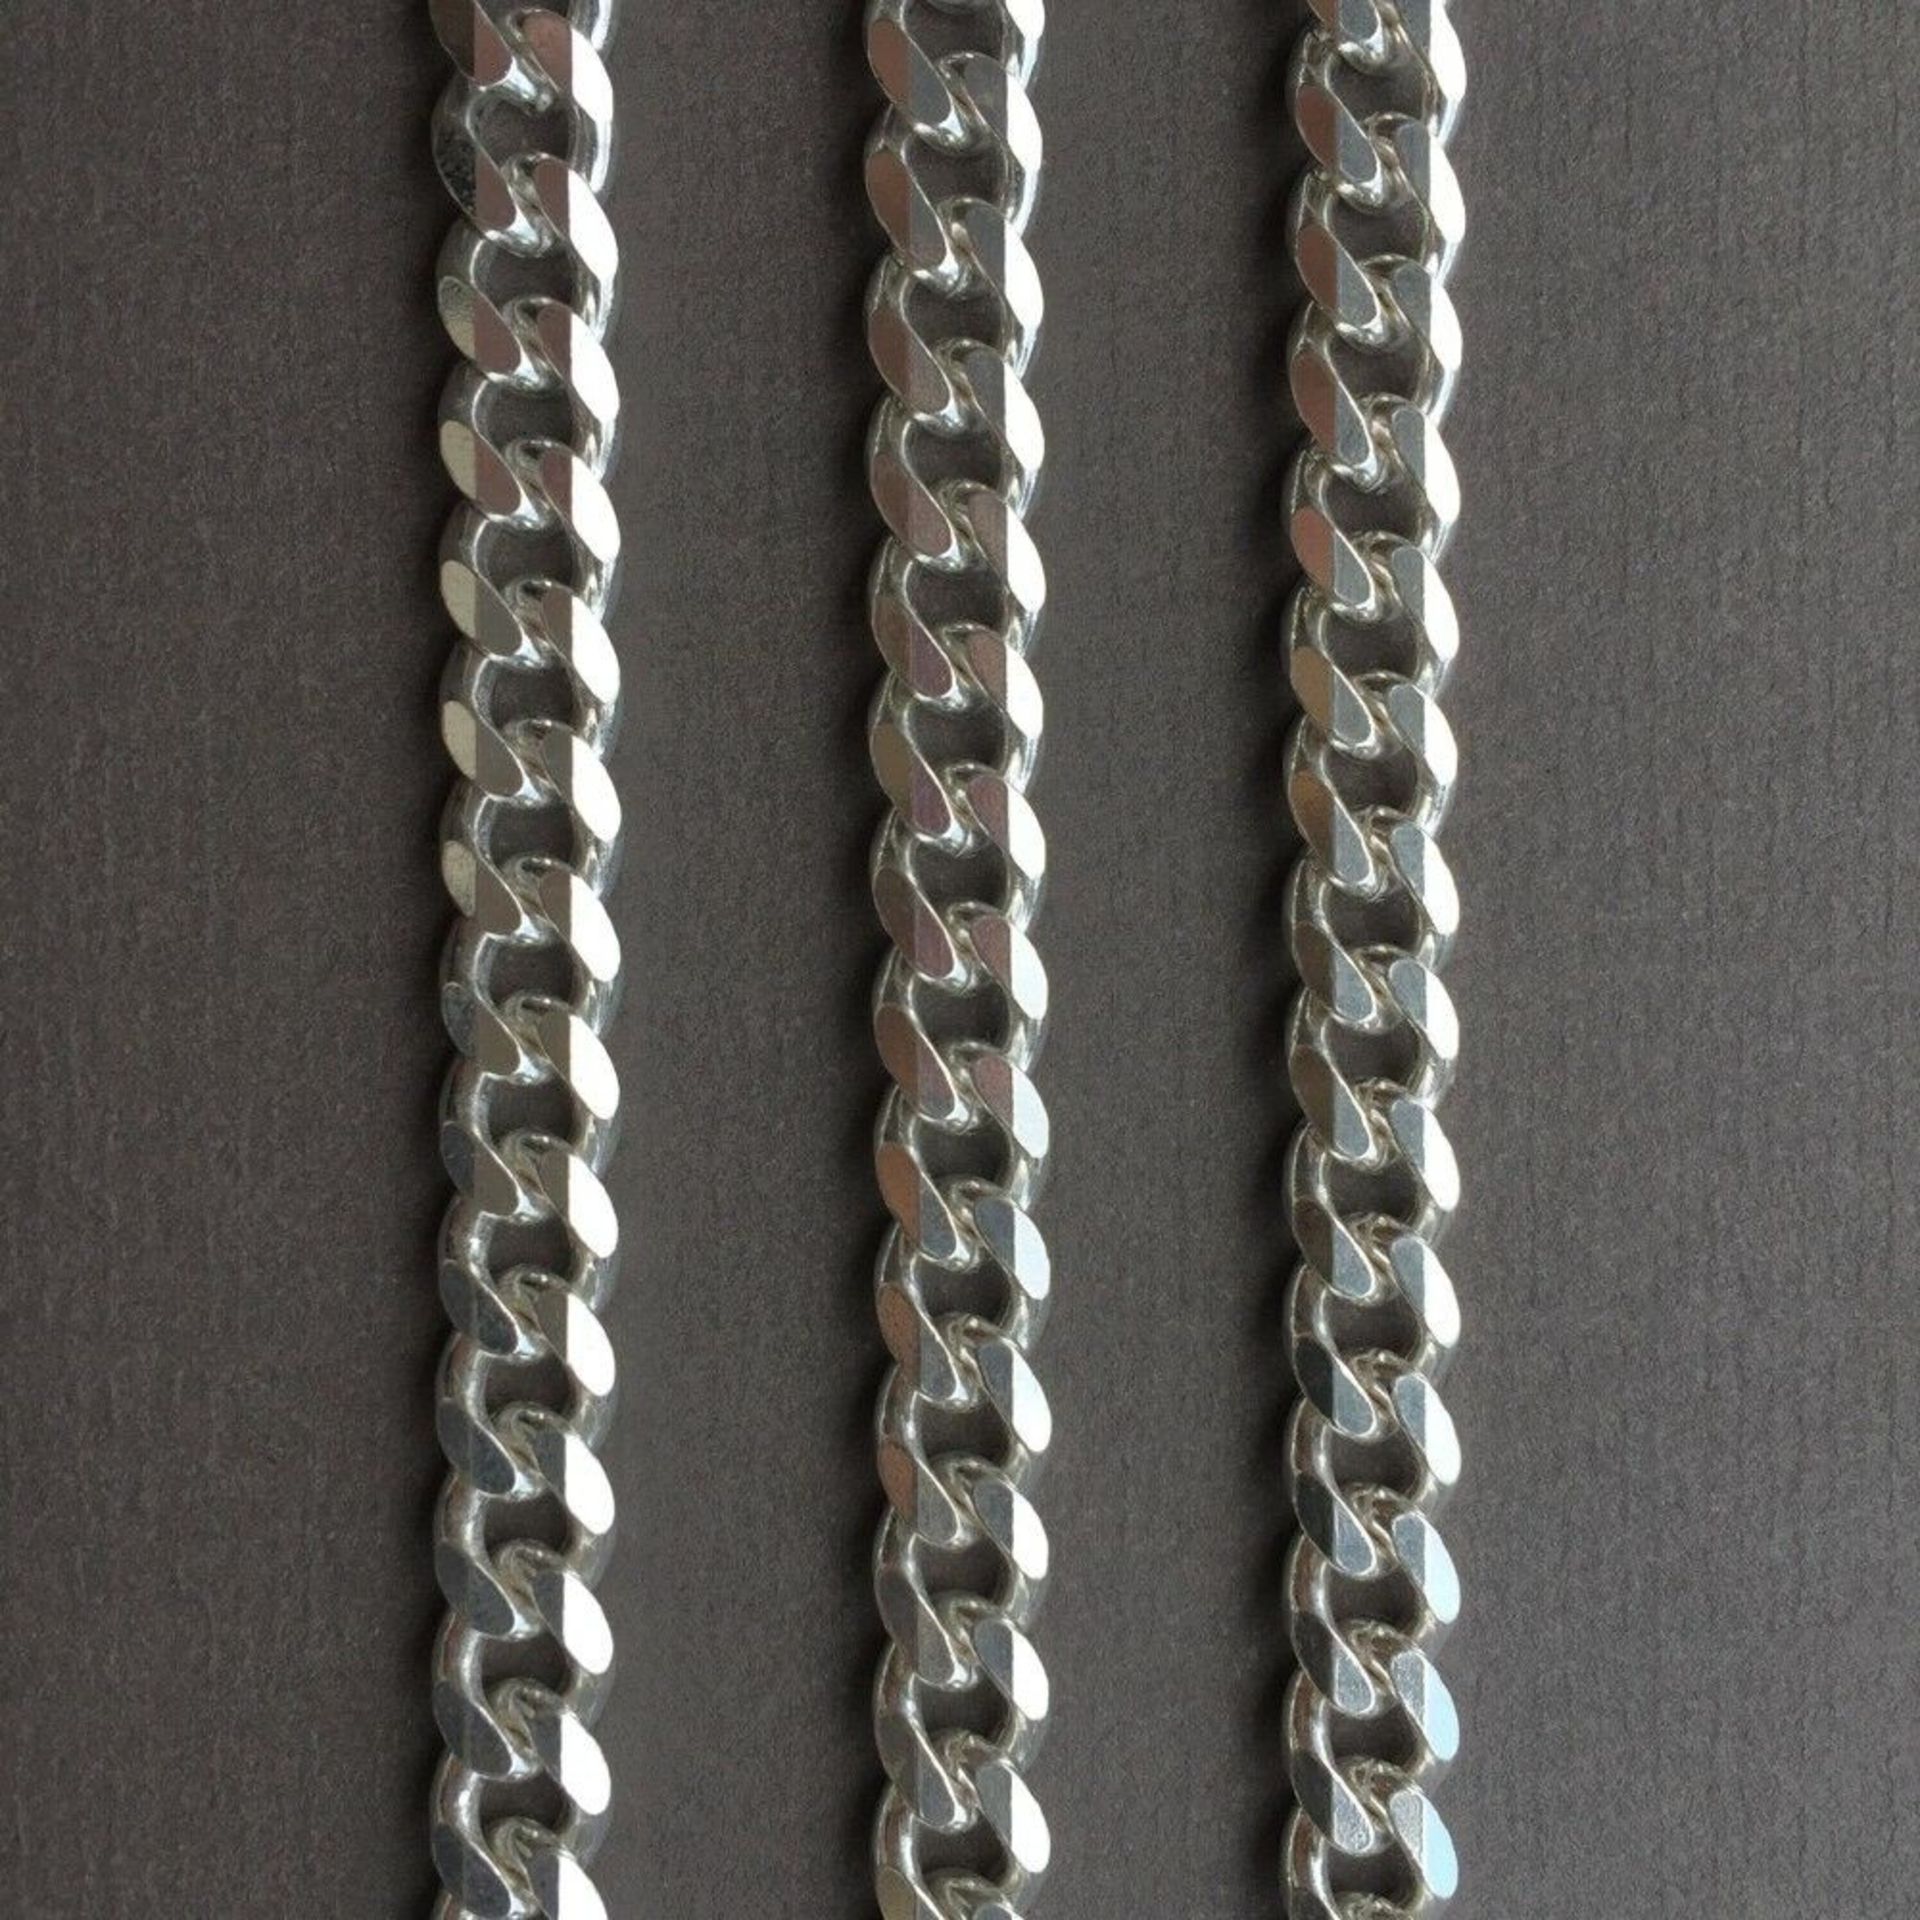 7mm Men's Curb Cuban Link Chain Necklace Pendant 925 Sterling Silver 48 GR 24 inch - 60cm - Image 5 of 7